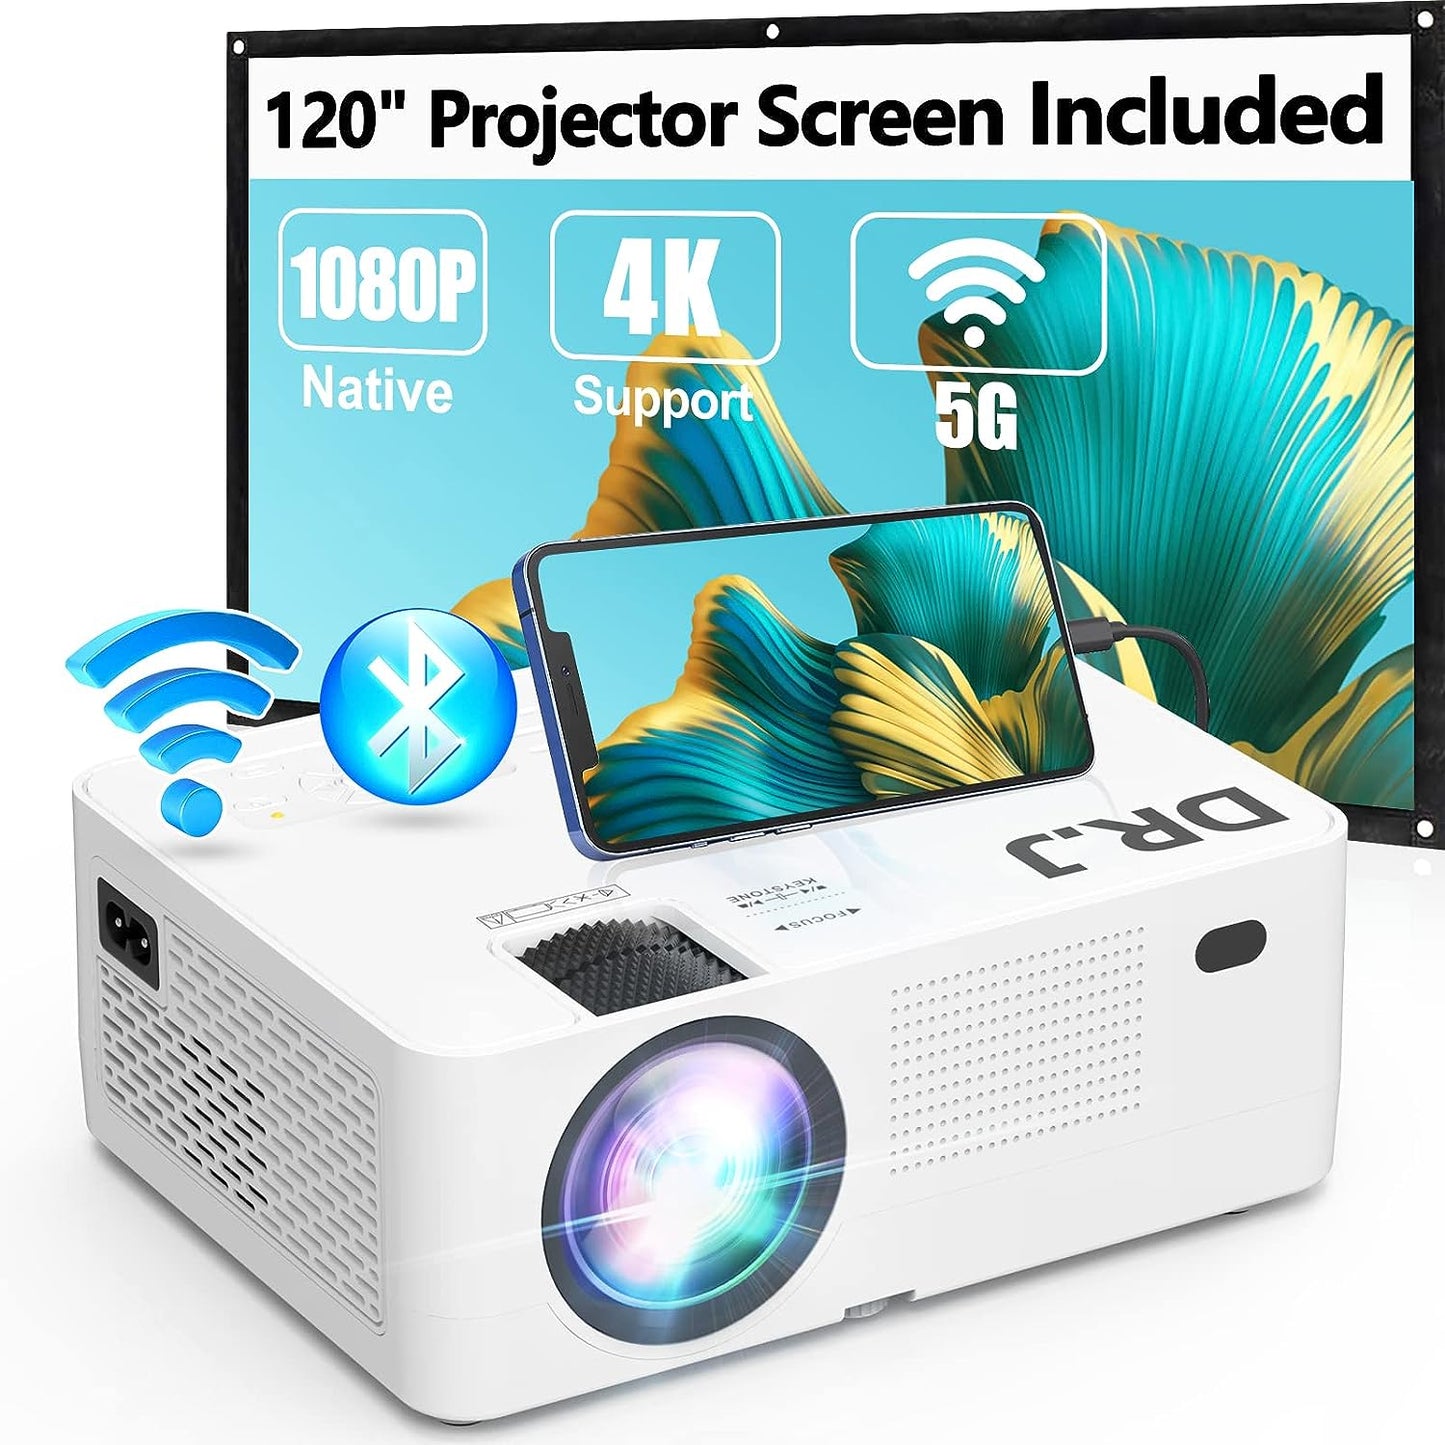 5G WiFi Bluetooth Projector, Full HD Native 1080P Projector 13000 Lumens with Wireless Mirroring Screen